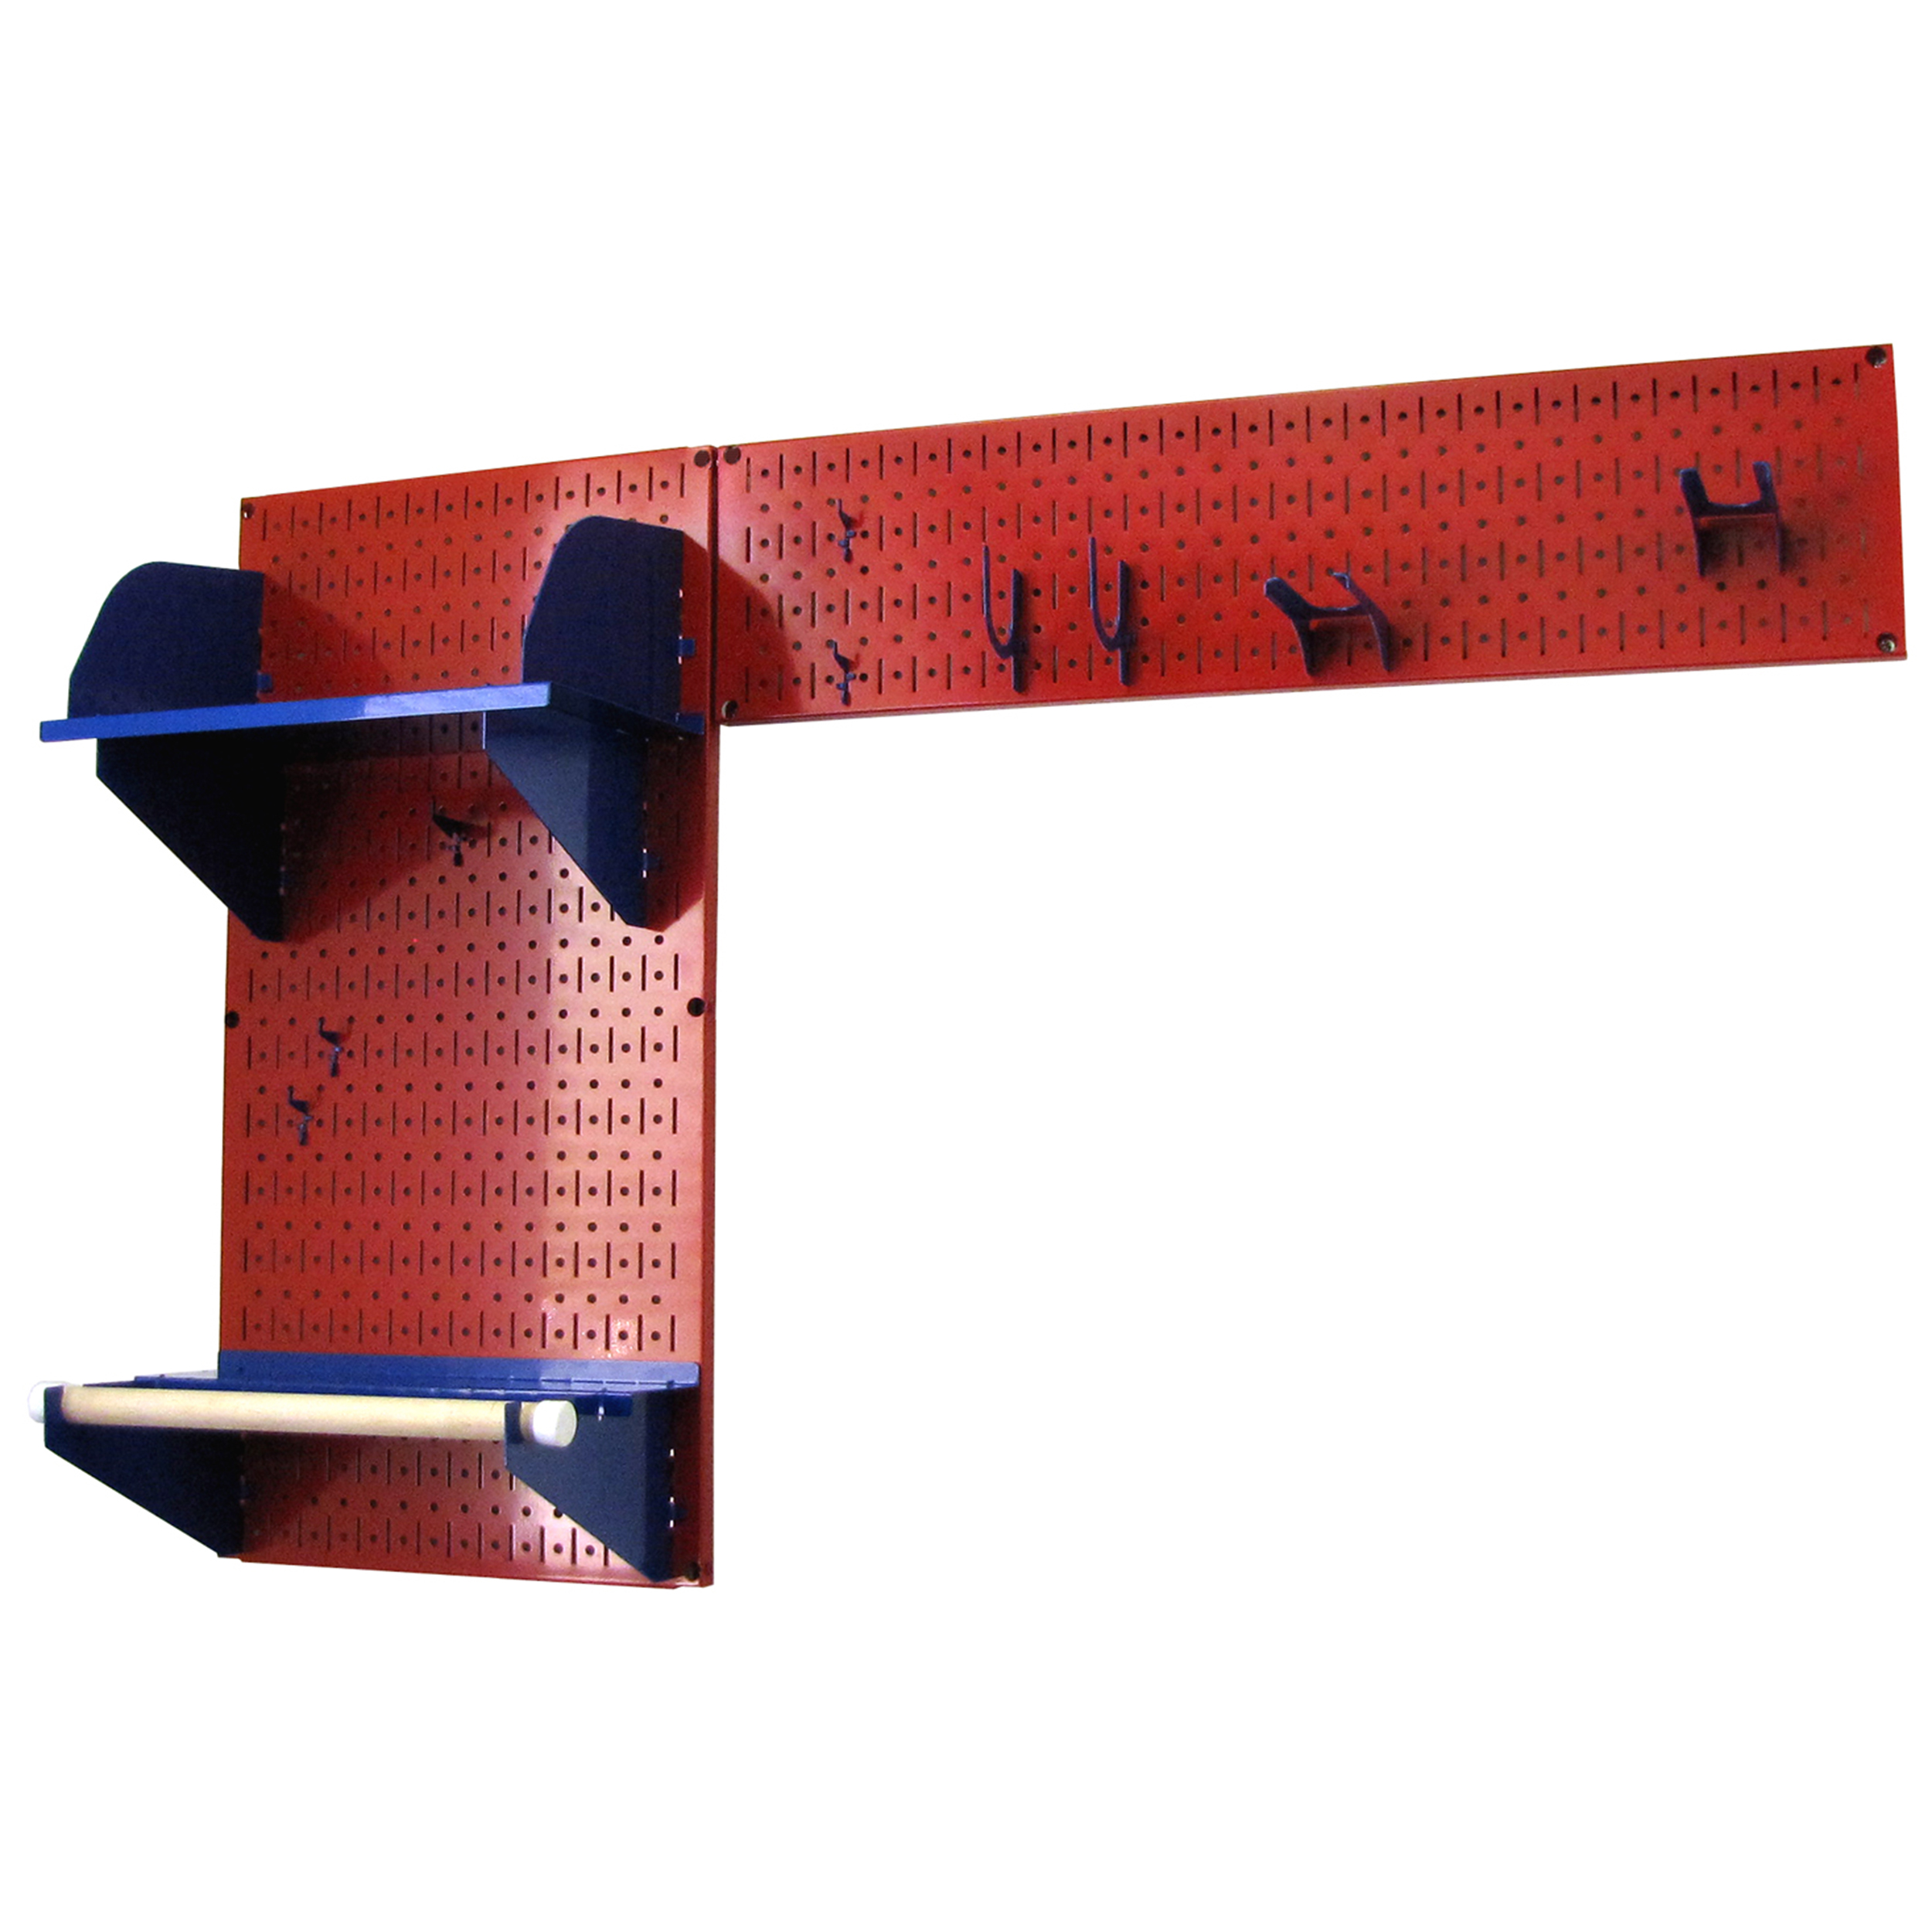 Pegboard Garden Tool Board Organizer With Red Pegboard And Blue Accessories